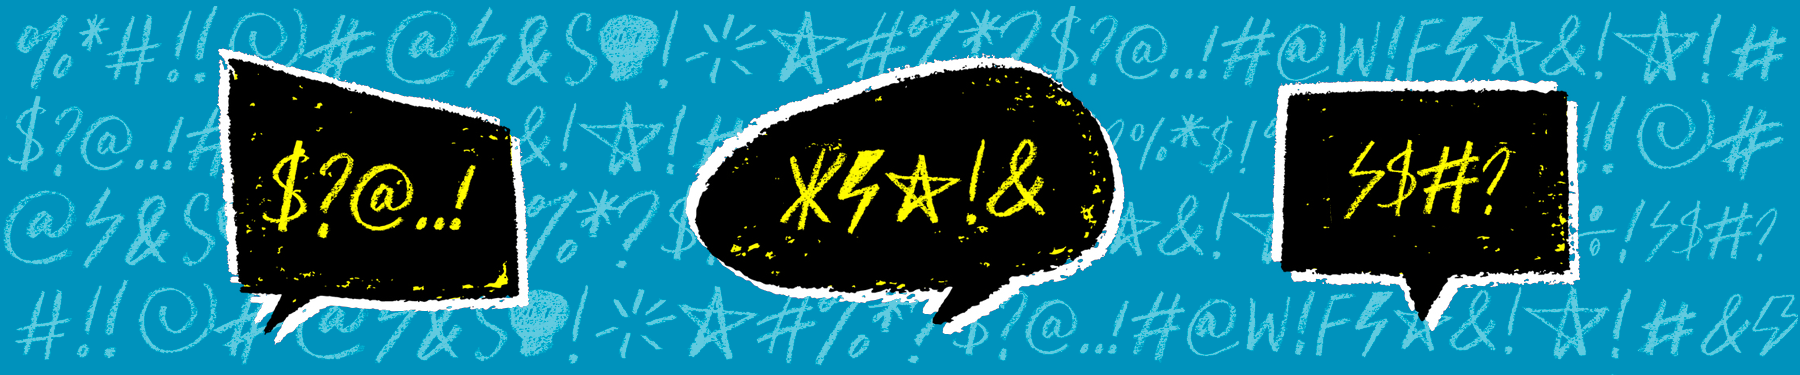 Special characters (grawlix) in speech bubbles expressing anger and rage.